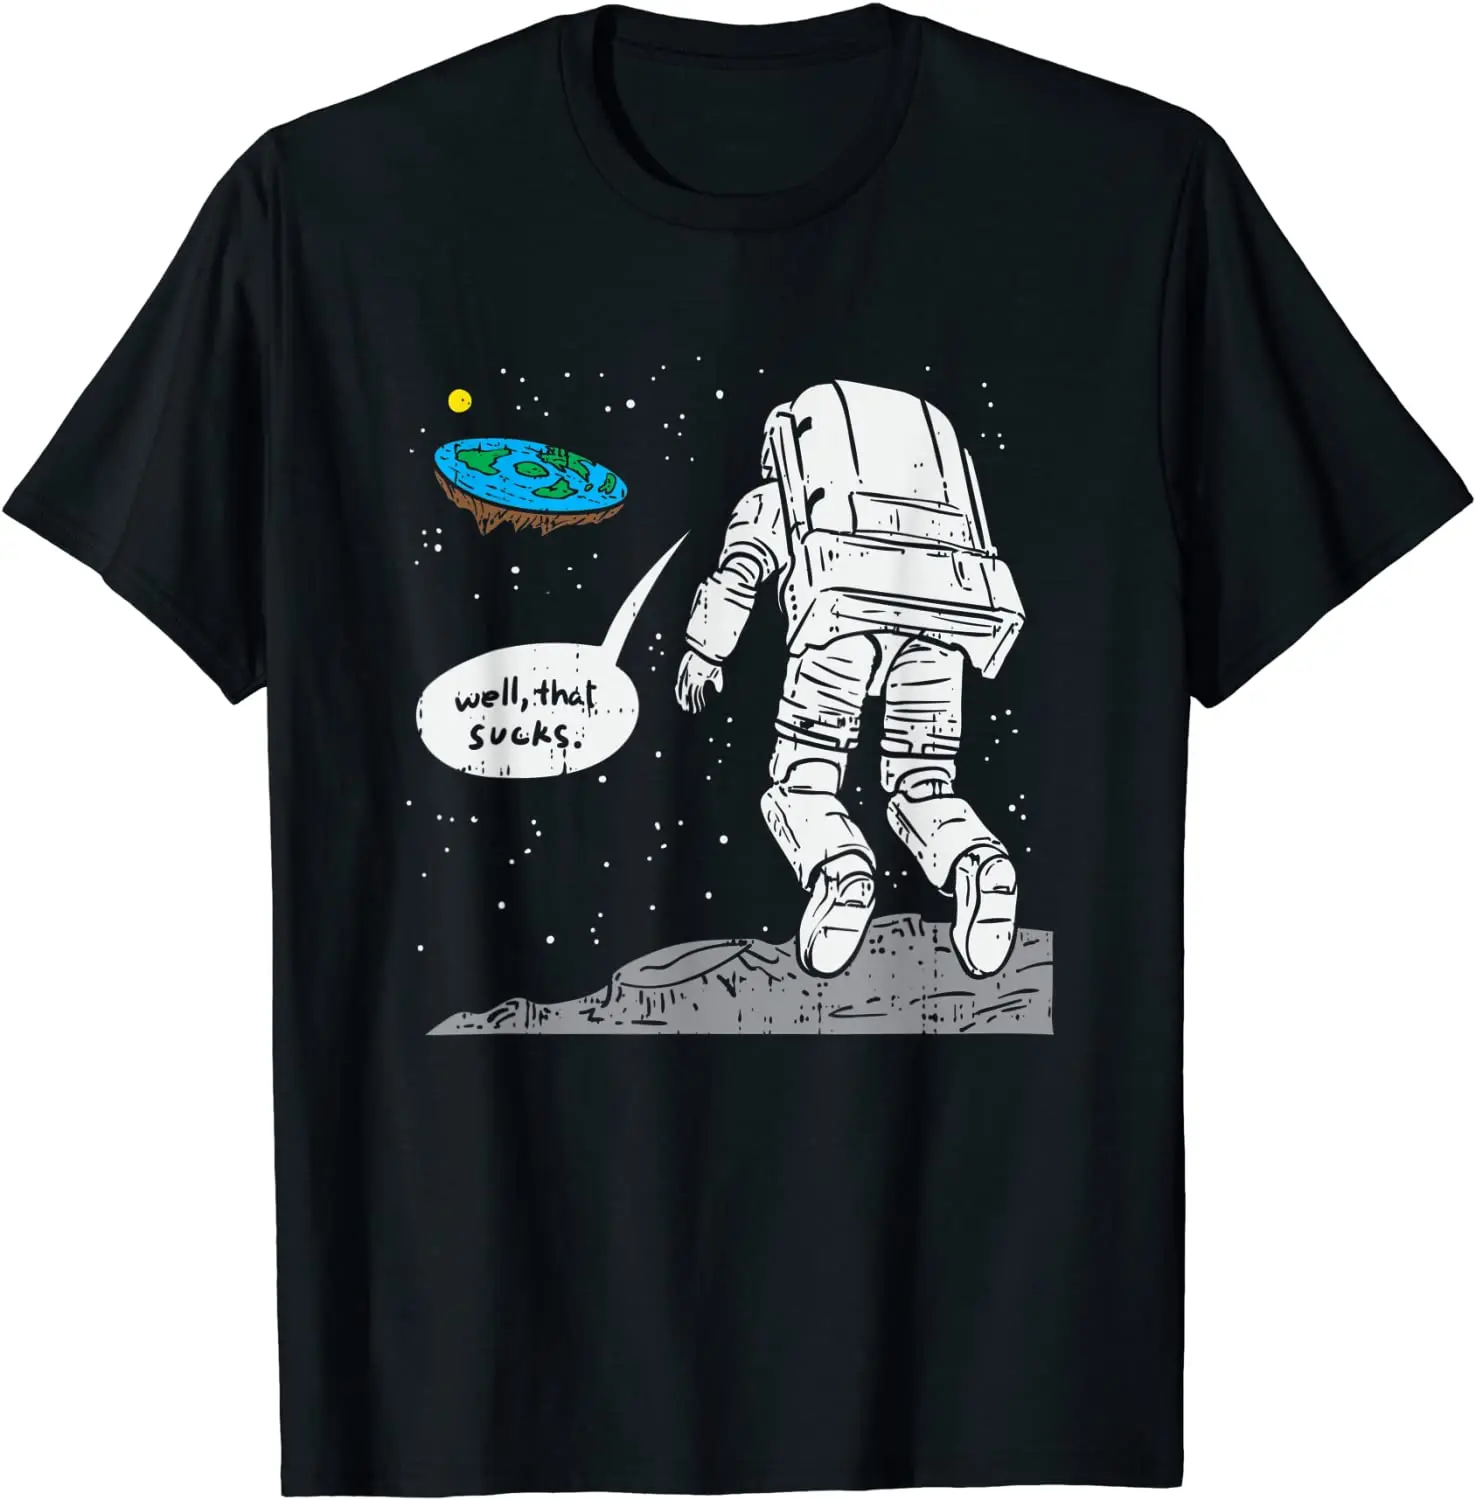 Funny Moon Landing, Flat Earth, That Sucks, Space T-Shirt Cotton Men's Top T-shirts Casual Tops & Tees Latest Customized